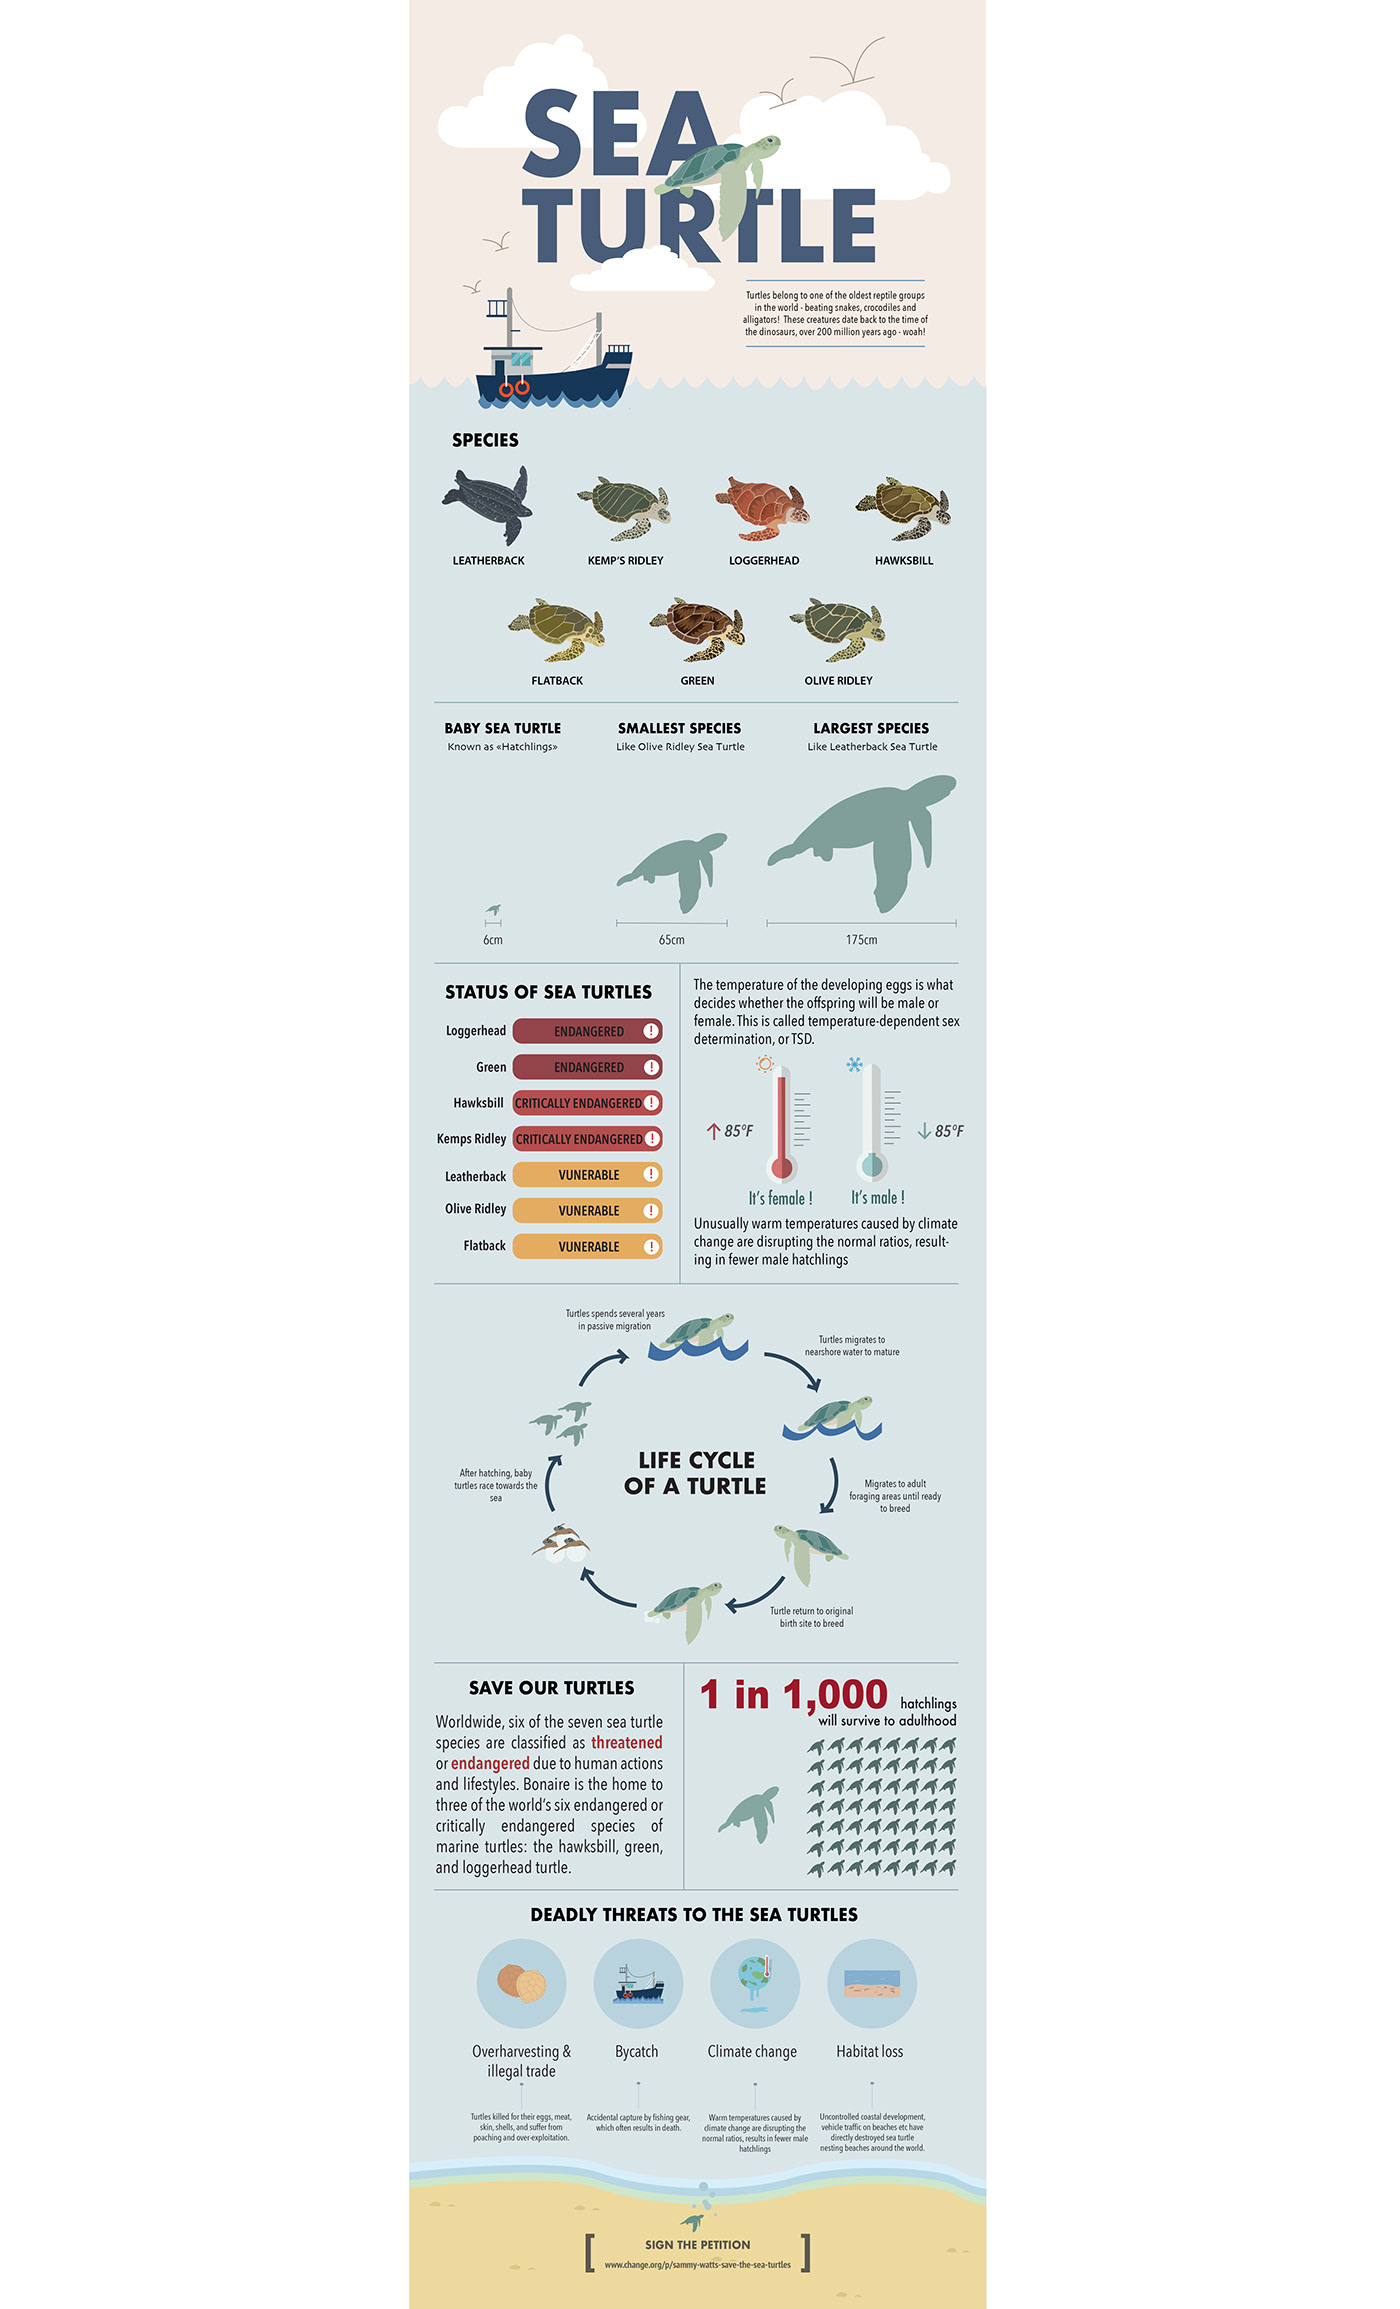 SeaTurtle infographic poster